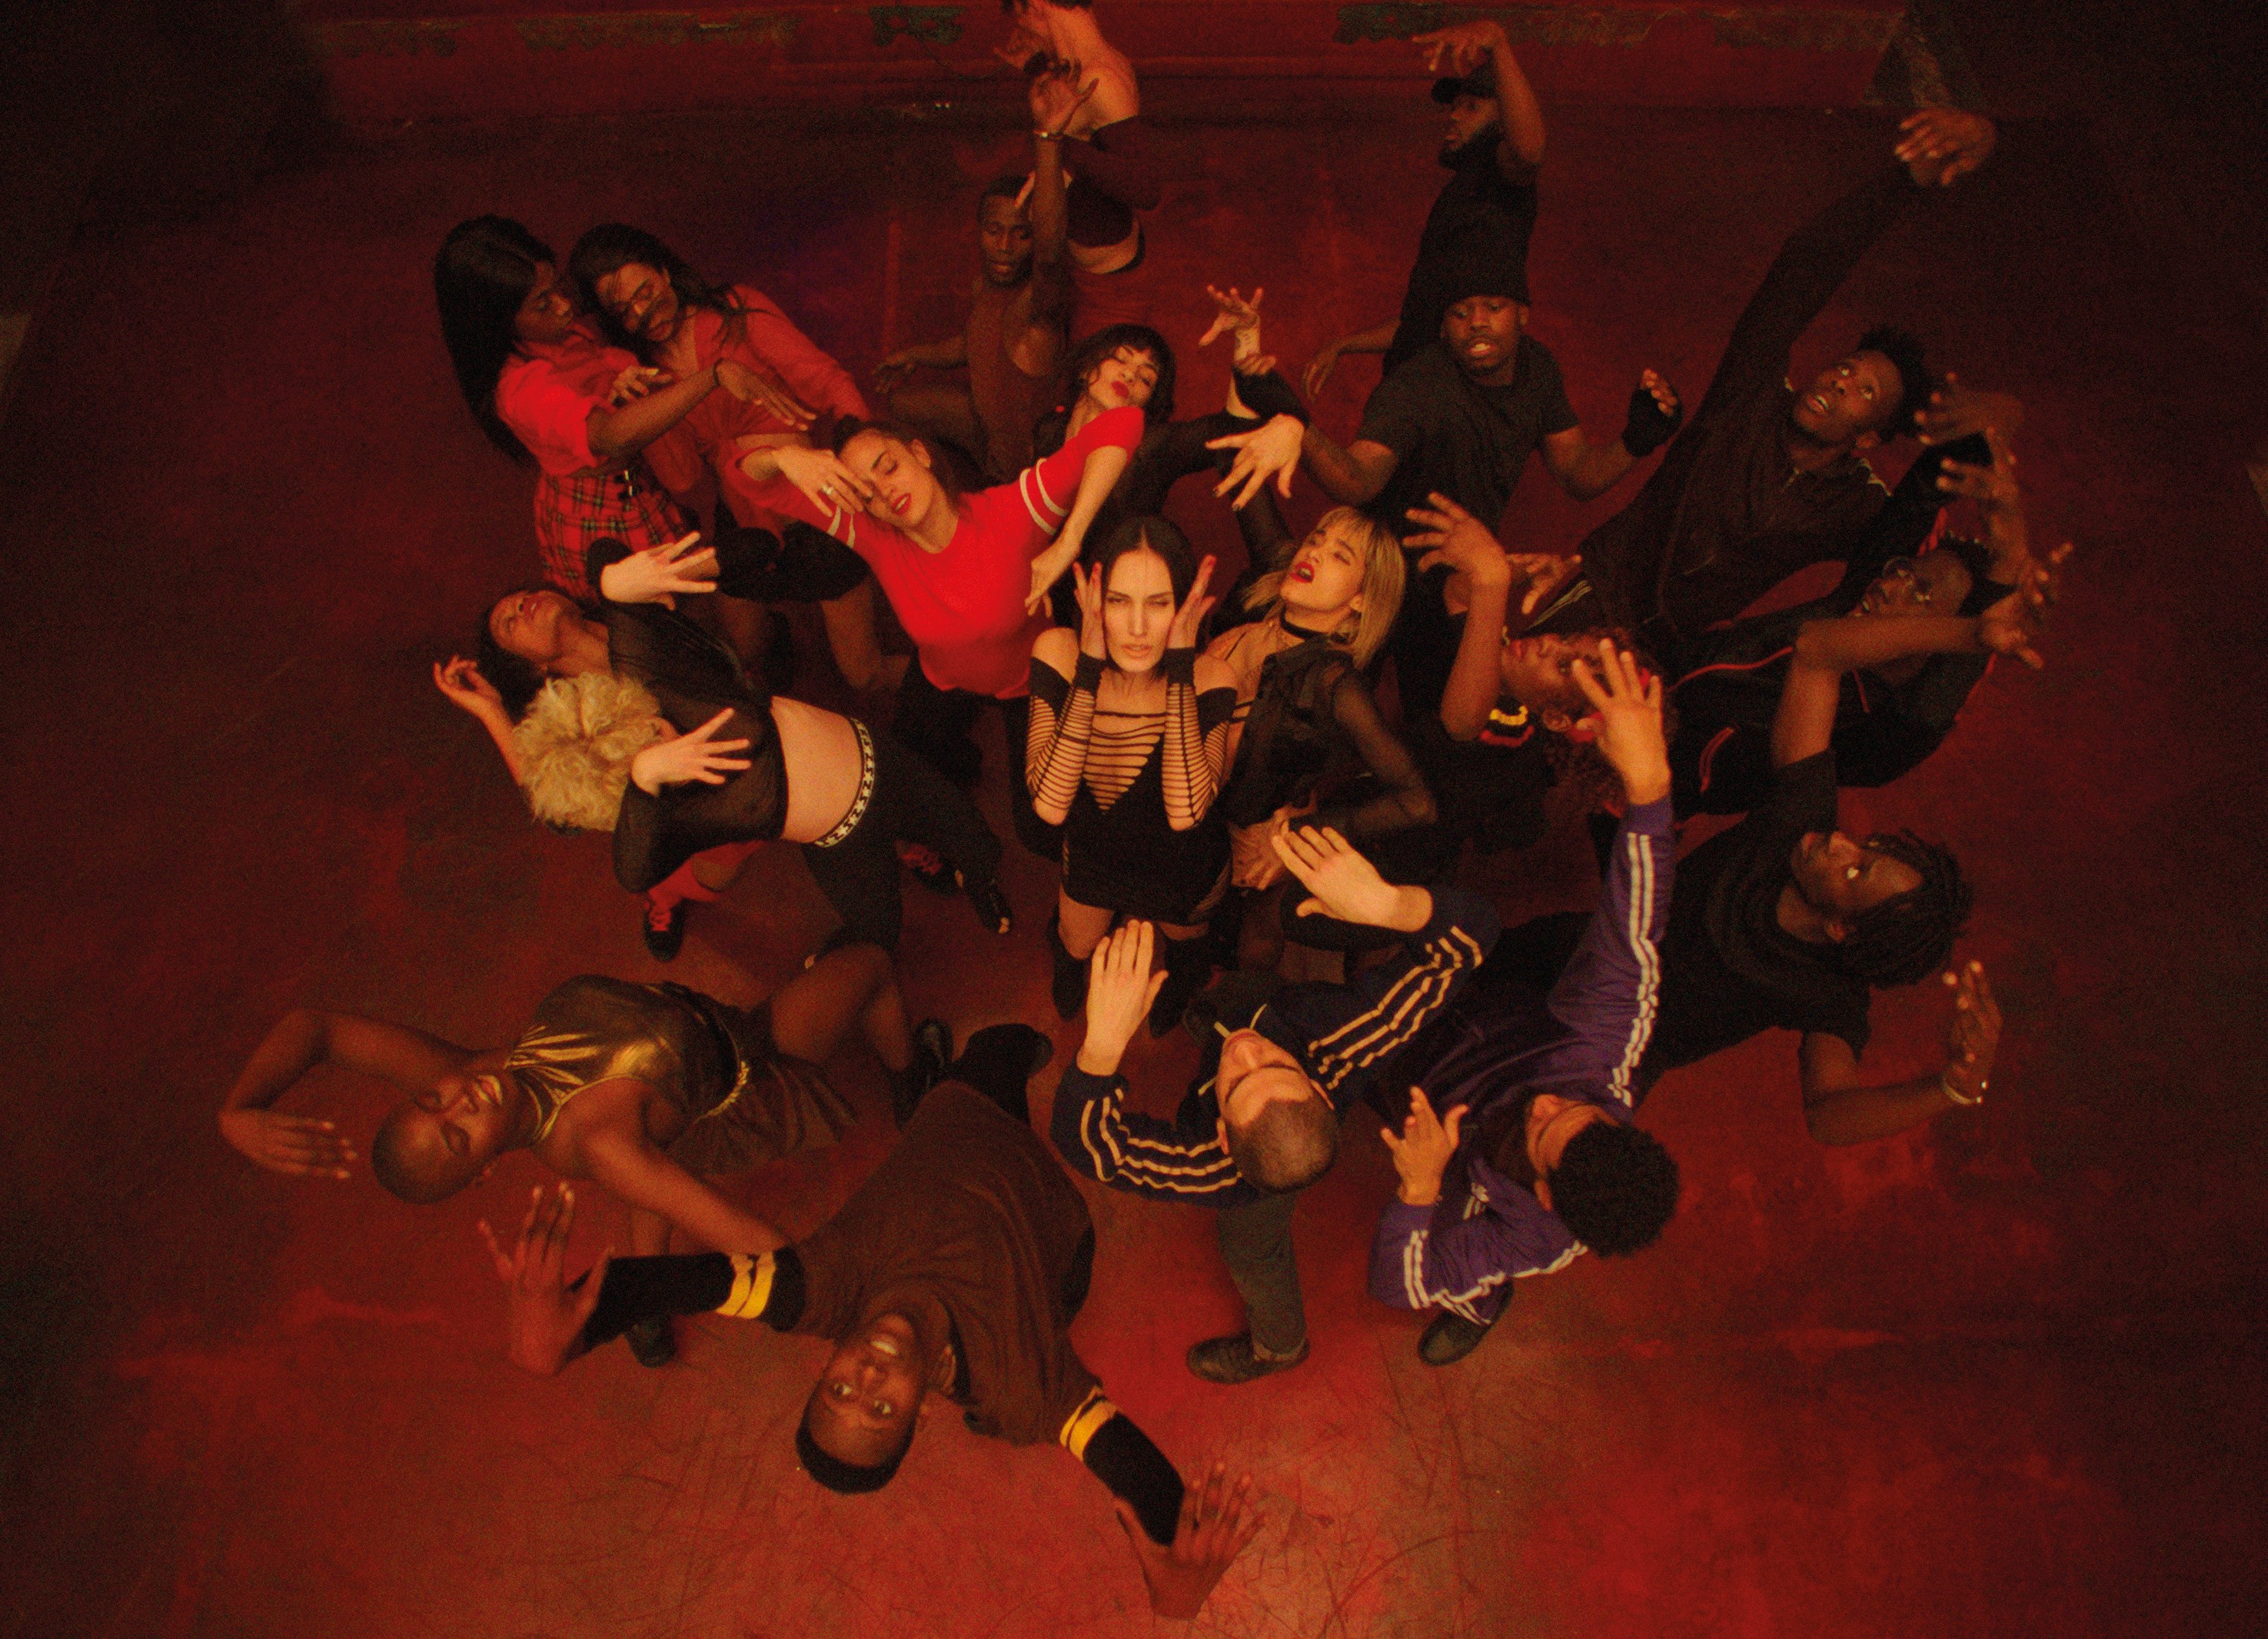 TIFF Review Gaspar Noé's 'Climax' Offers Dance and Madness